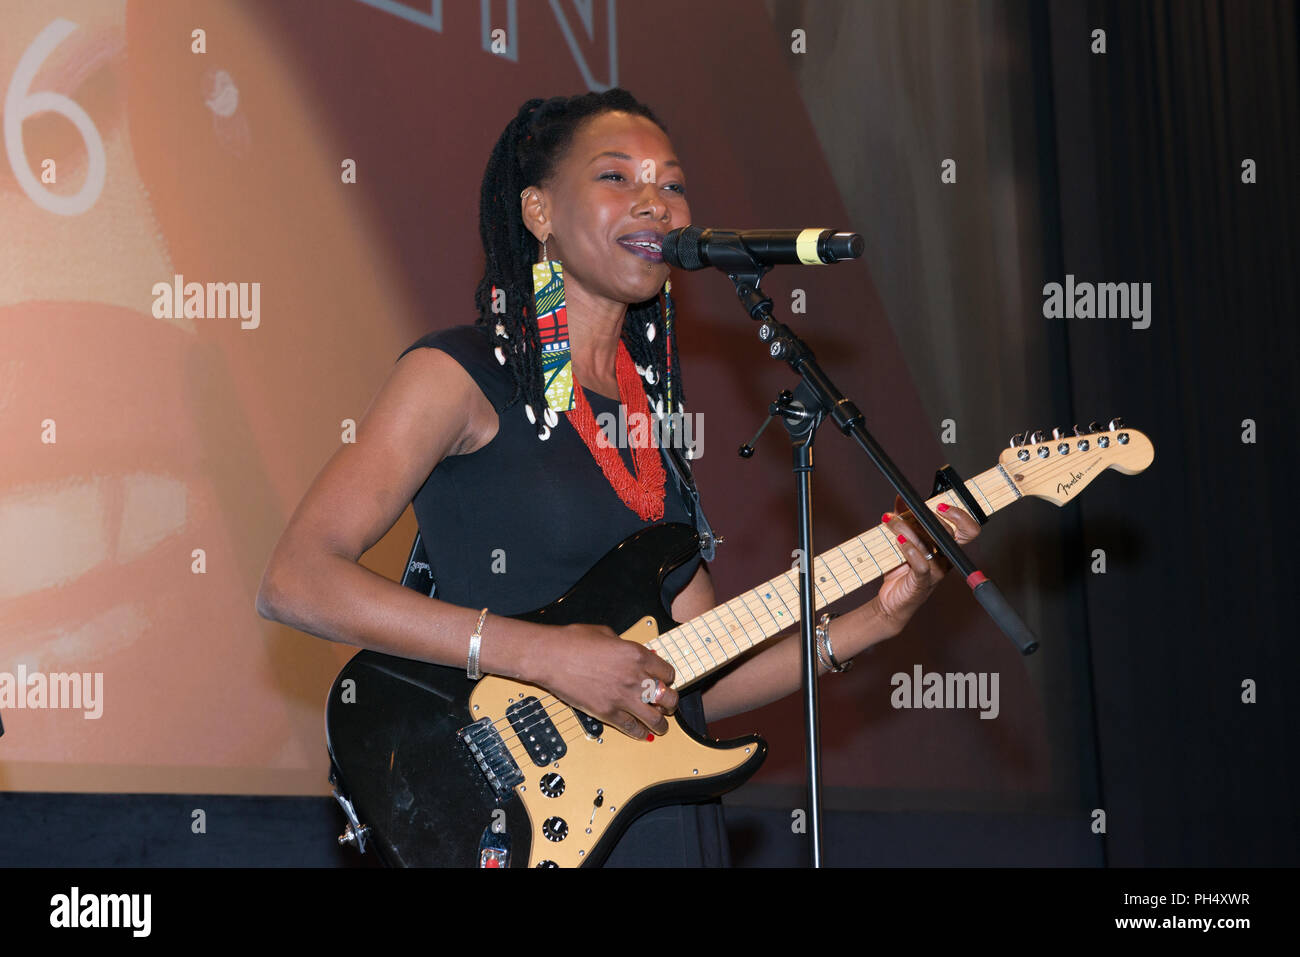 actress and musician Fatoumata Diawara performs before the screening of her Film 'Mali Blues' at the Filmfest München 2016 Stock Photo